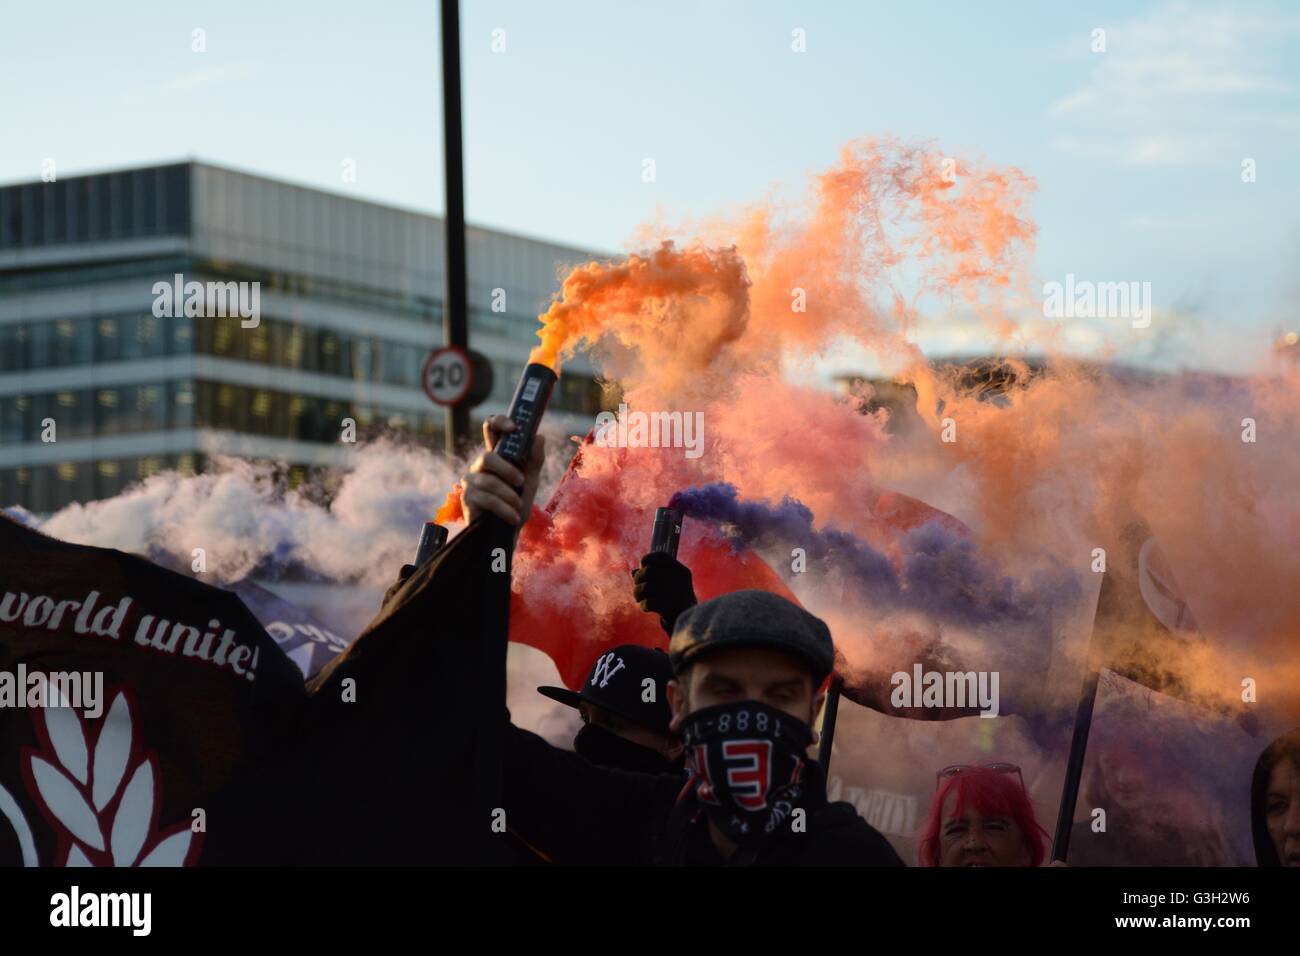 London, UK. 24 June, 2016. Pro-europe and migrant rally held in London.  More smoke filling the air during pro-refugee march. Credit:  Marc Ward/Alamy Live News Stock Photo